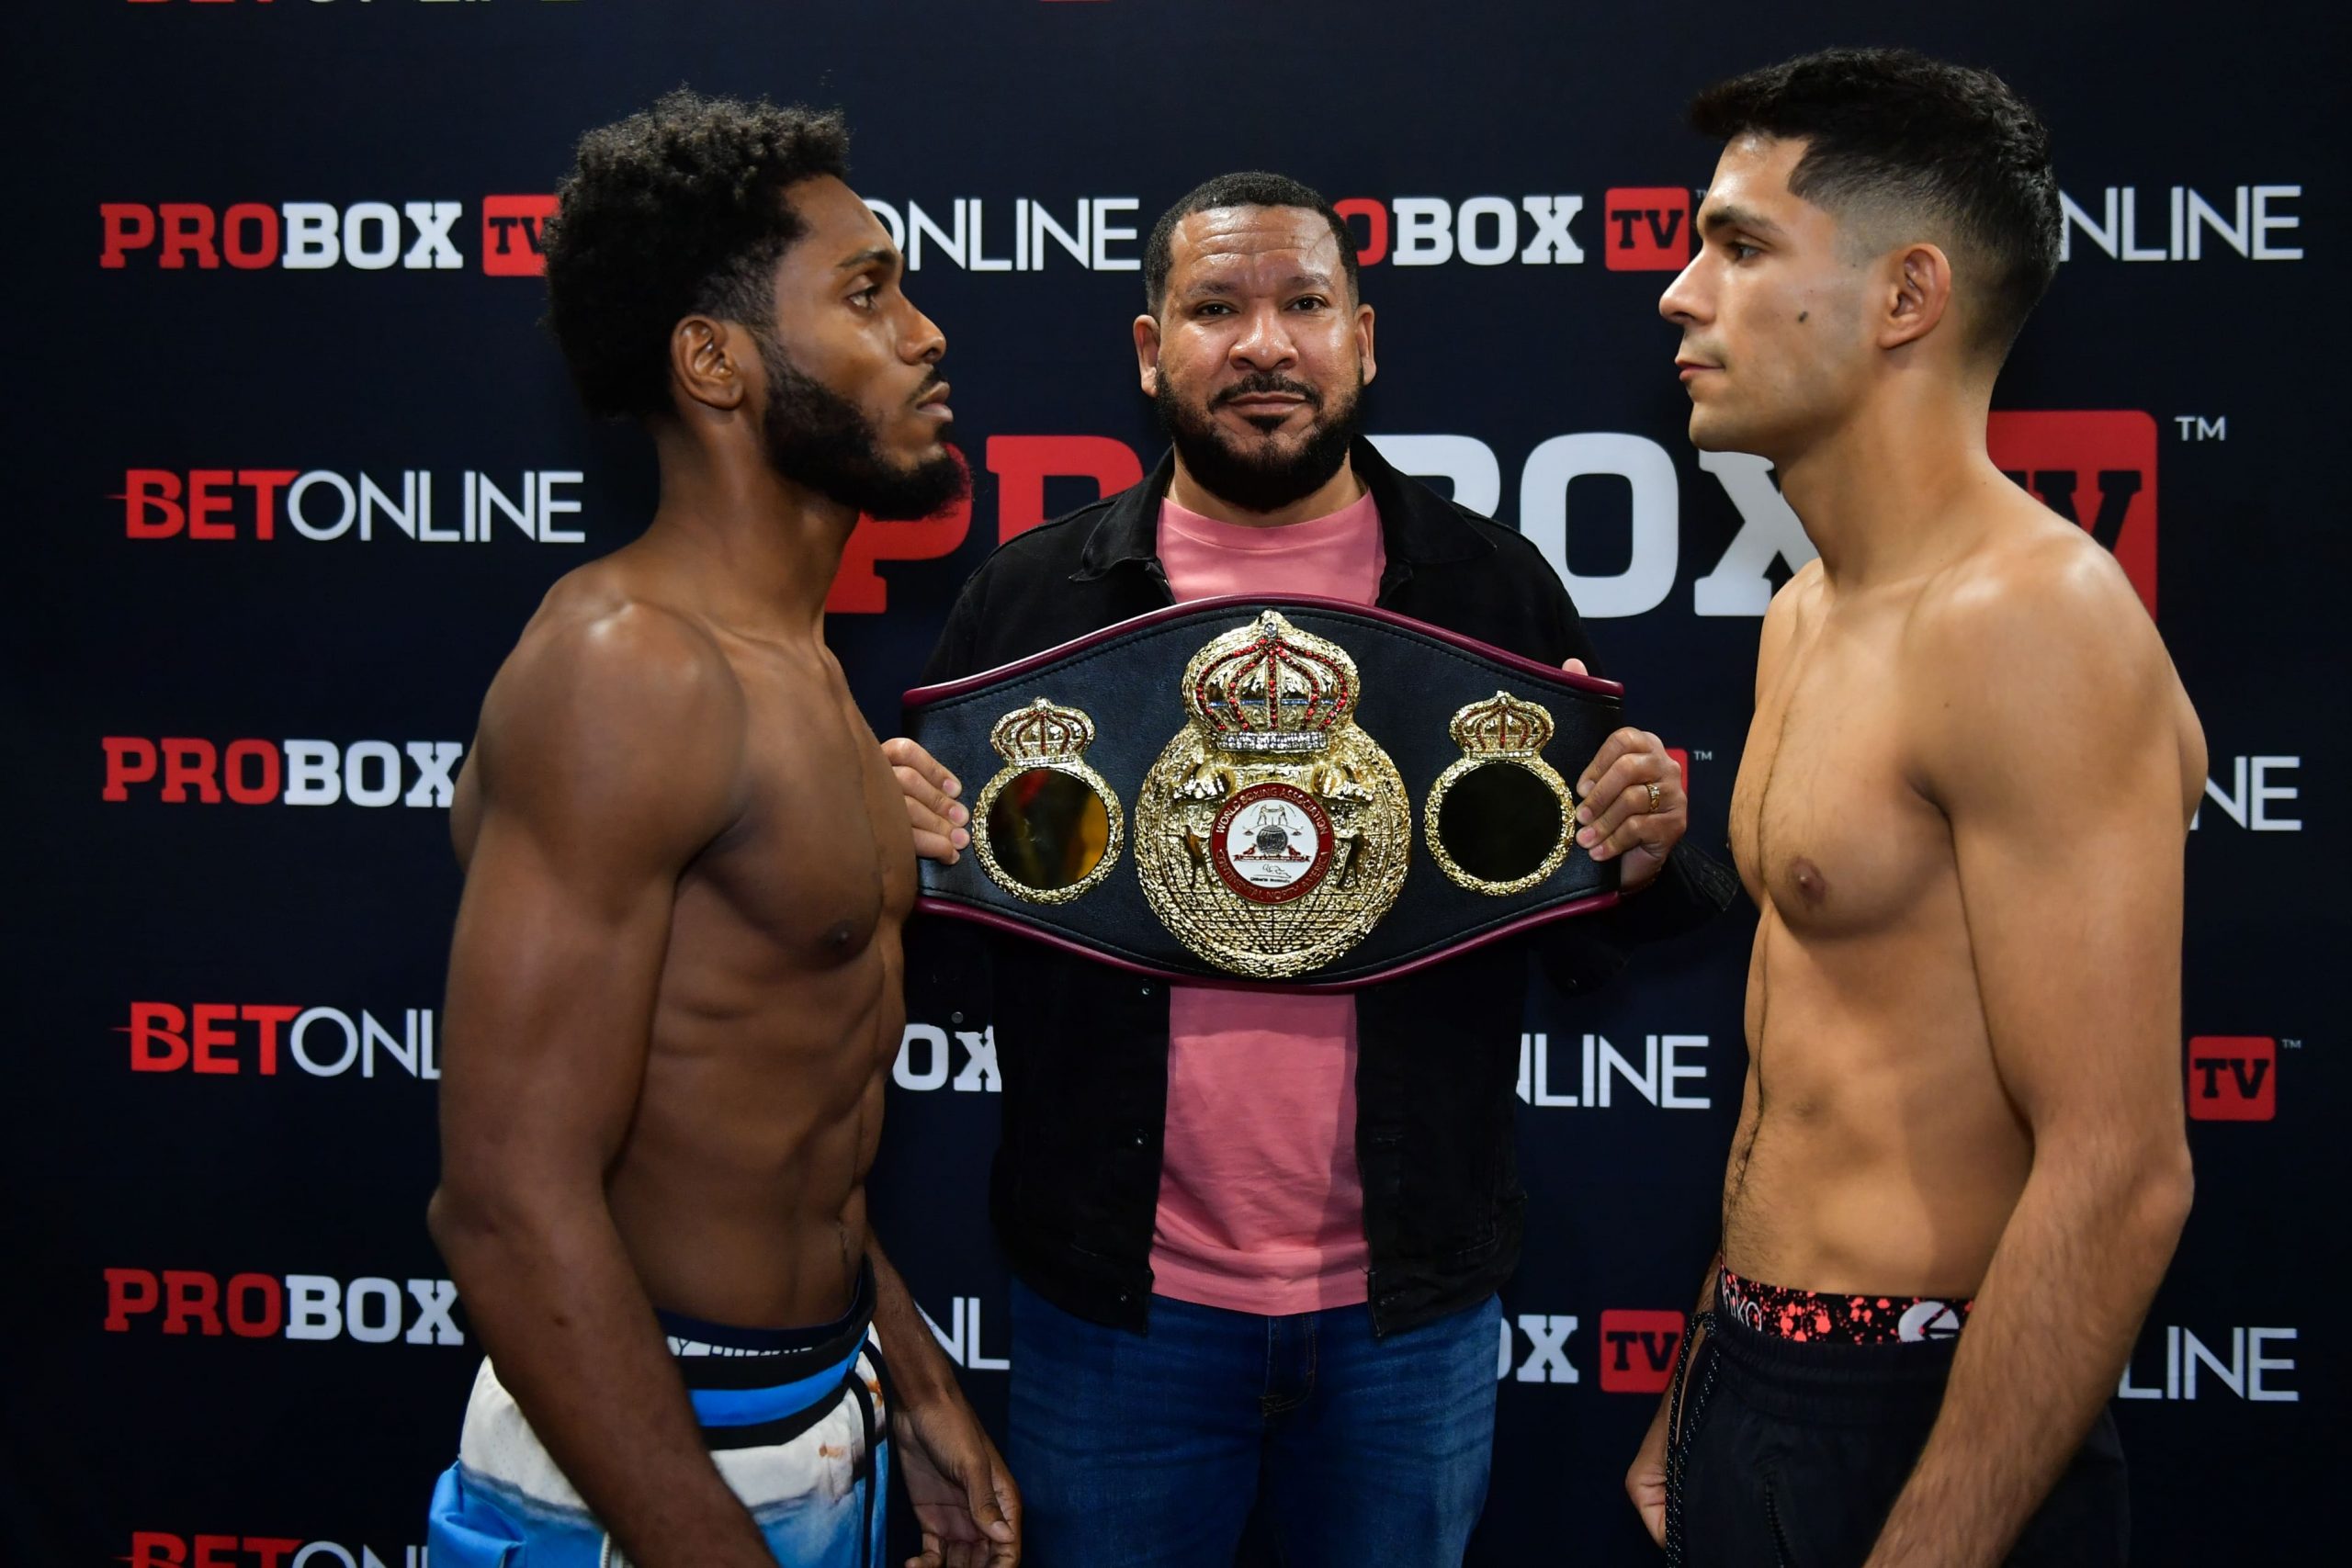 Justin Pauldo aims for a statement win as he faces Jerry Perez in Florida